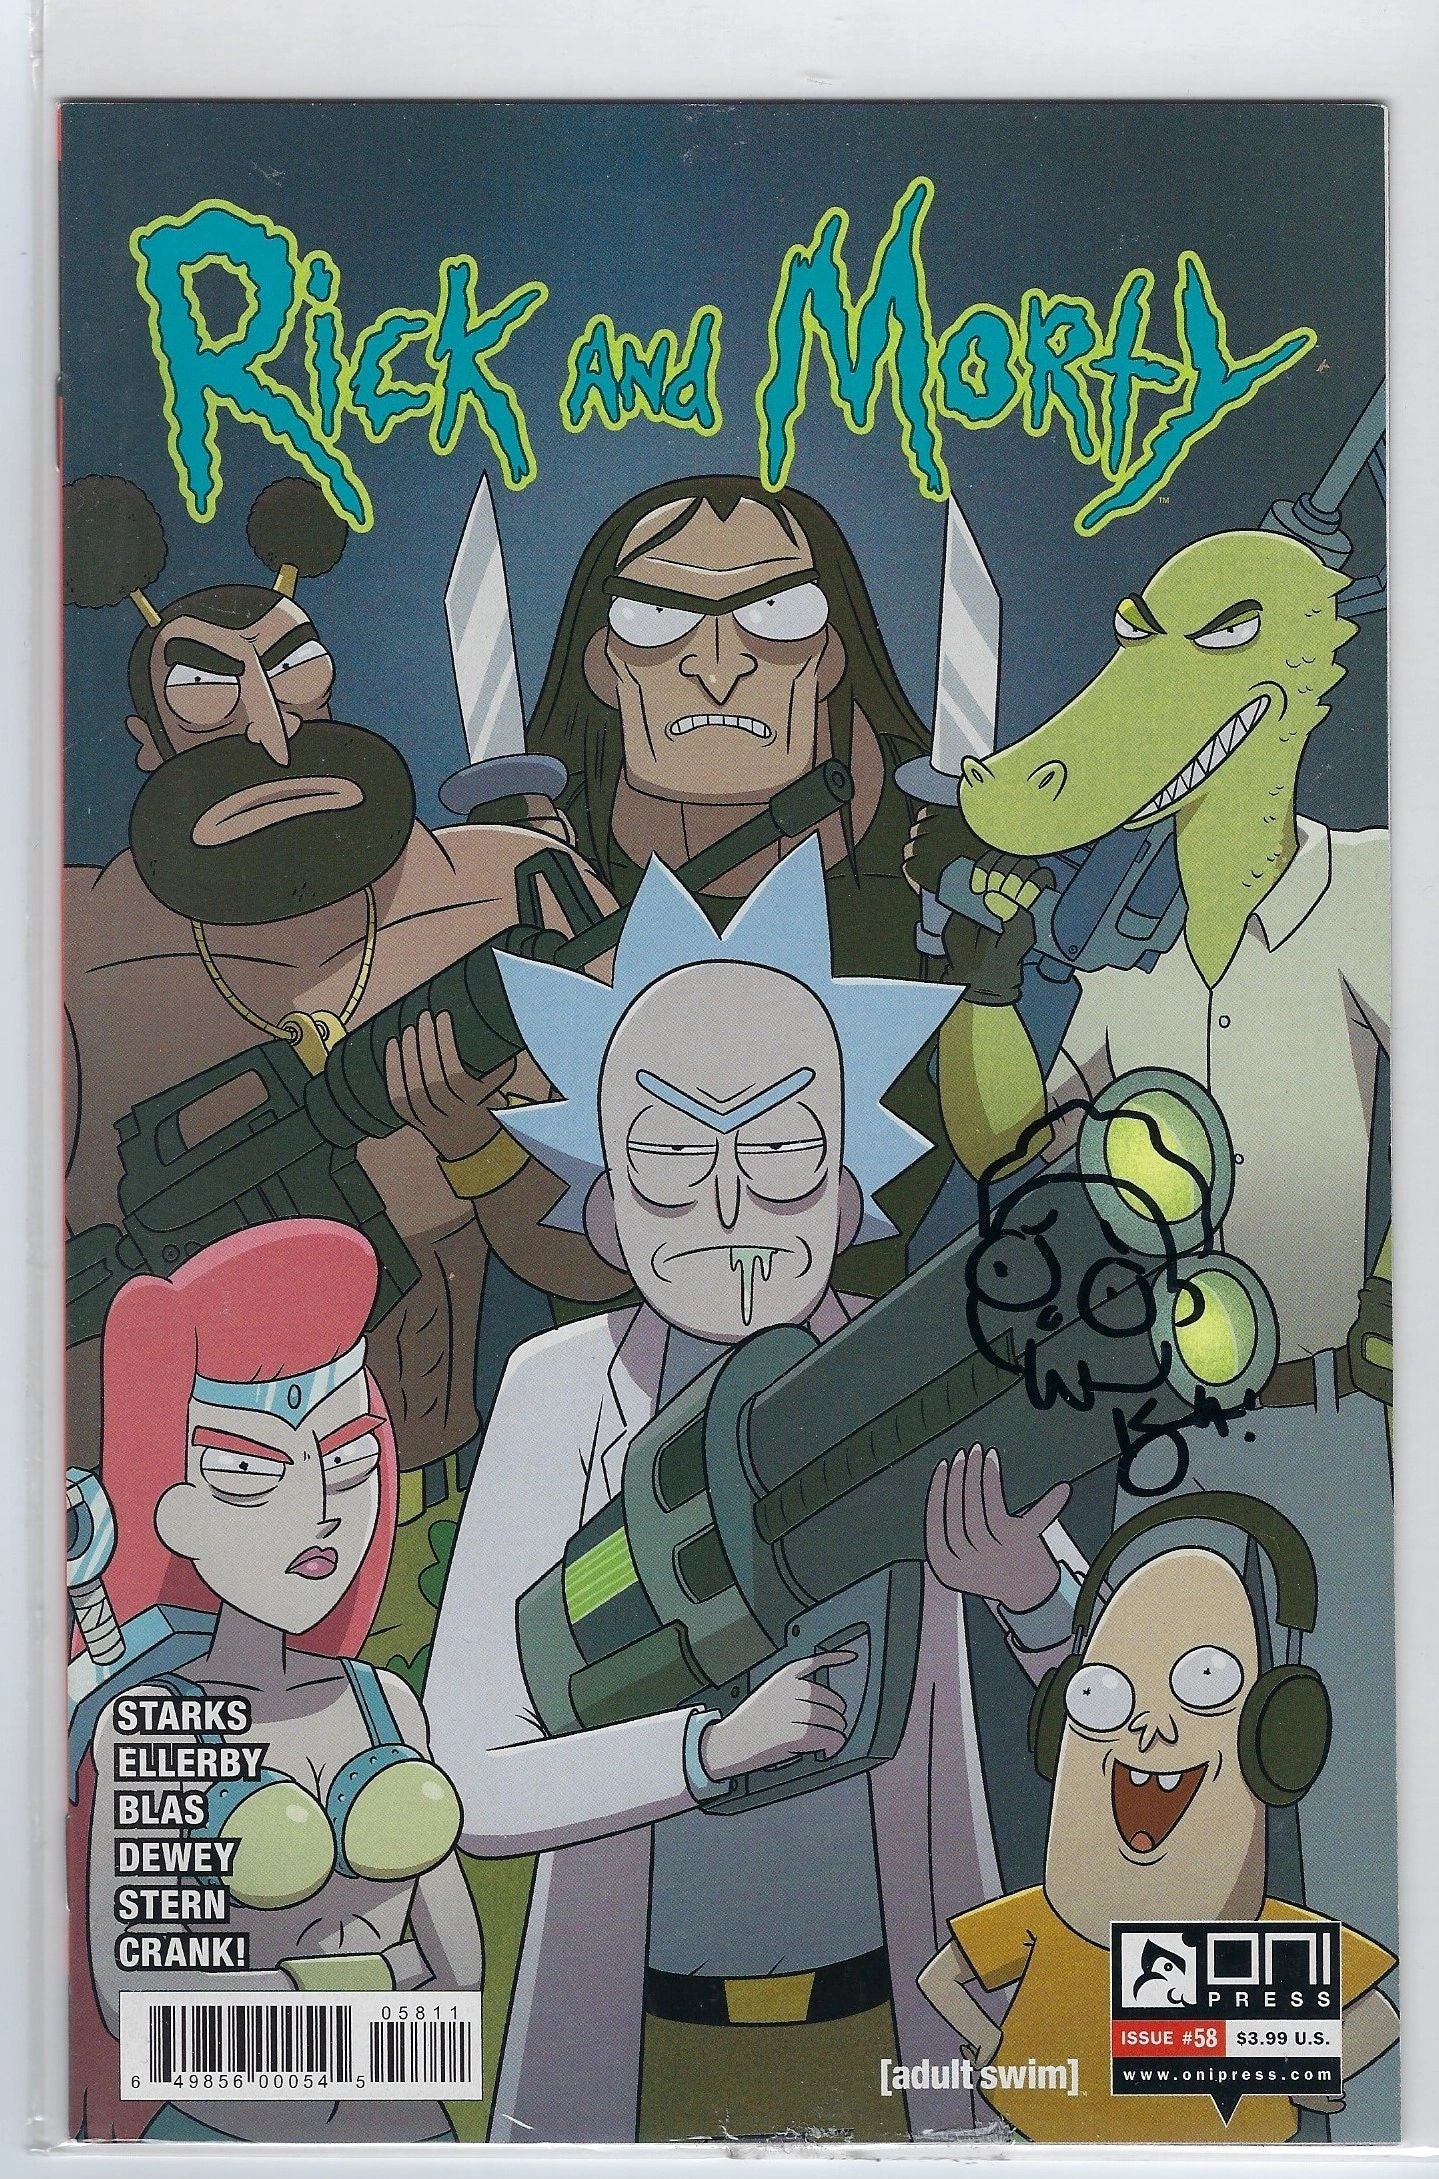 Kyle Starks Signed Rick & Morty Issue #58 With Sketch Beckett COA